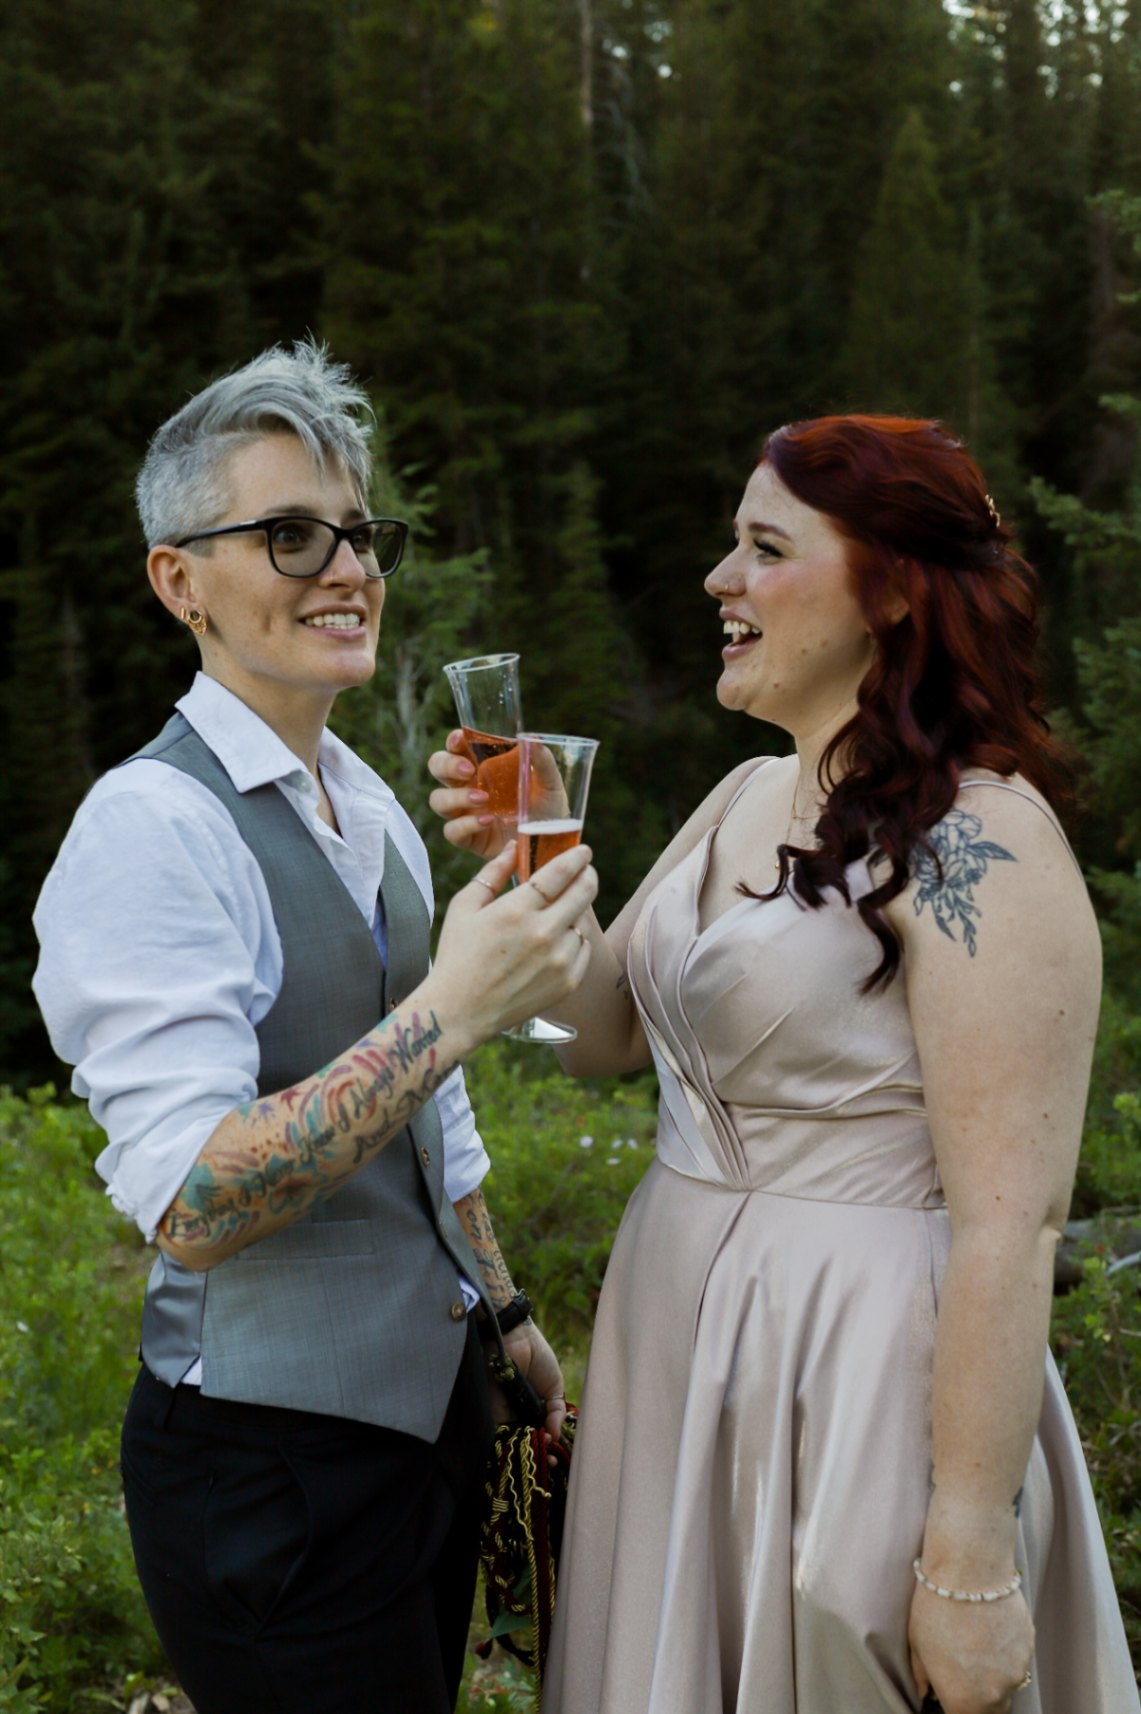 Two lesbian brides (both white, one with short gray hair, one with long dark red hair) toast with sparking rose. They each have tattoos. The nonbinary bride with short gray hair is wearing a gray vest, a white shirt and dark pants, as well as glasses. The red-haired bride is wearing a light pink dress with spaghetti straps.